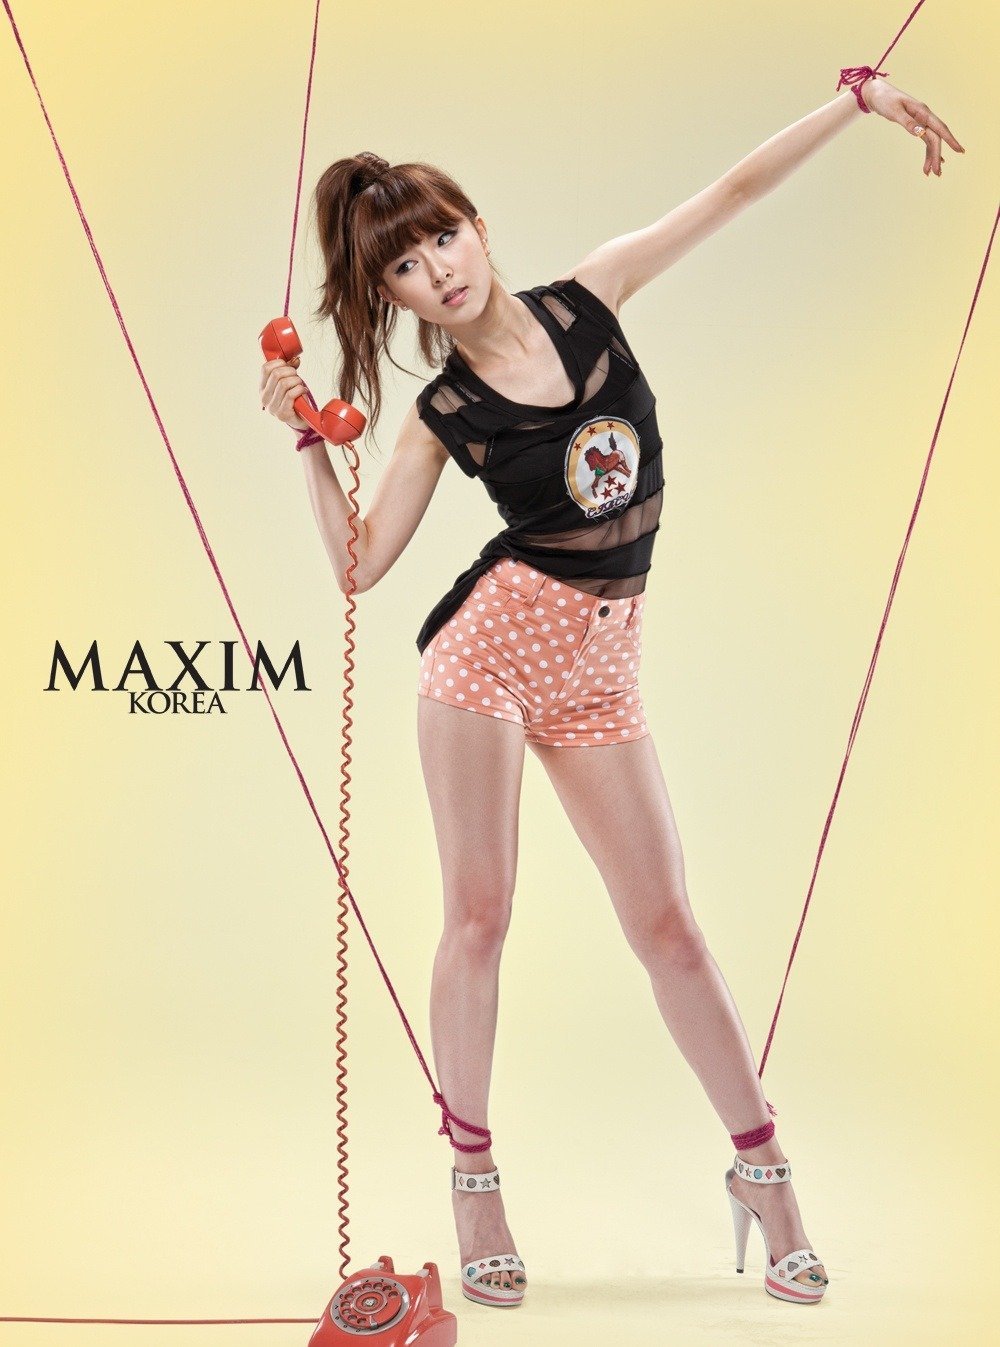 Here Are All The K-Pop Idols Who Modeled For Maxim :: FOOYOH